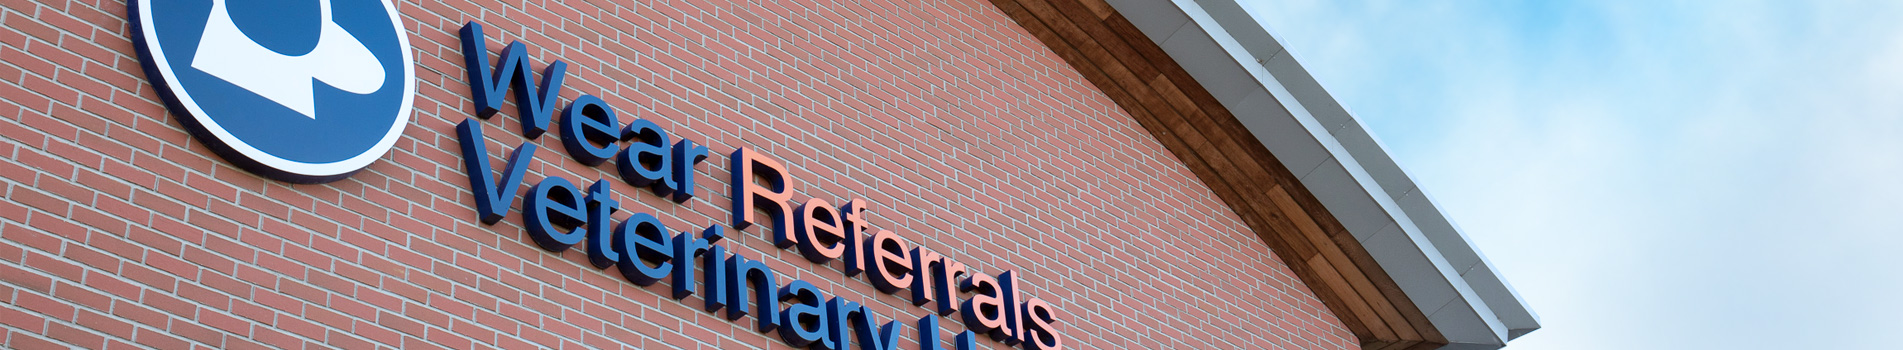 Careers at Wear Referrals Small Animal Hospital